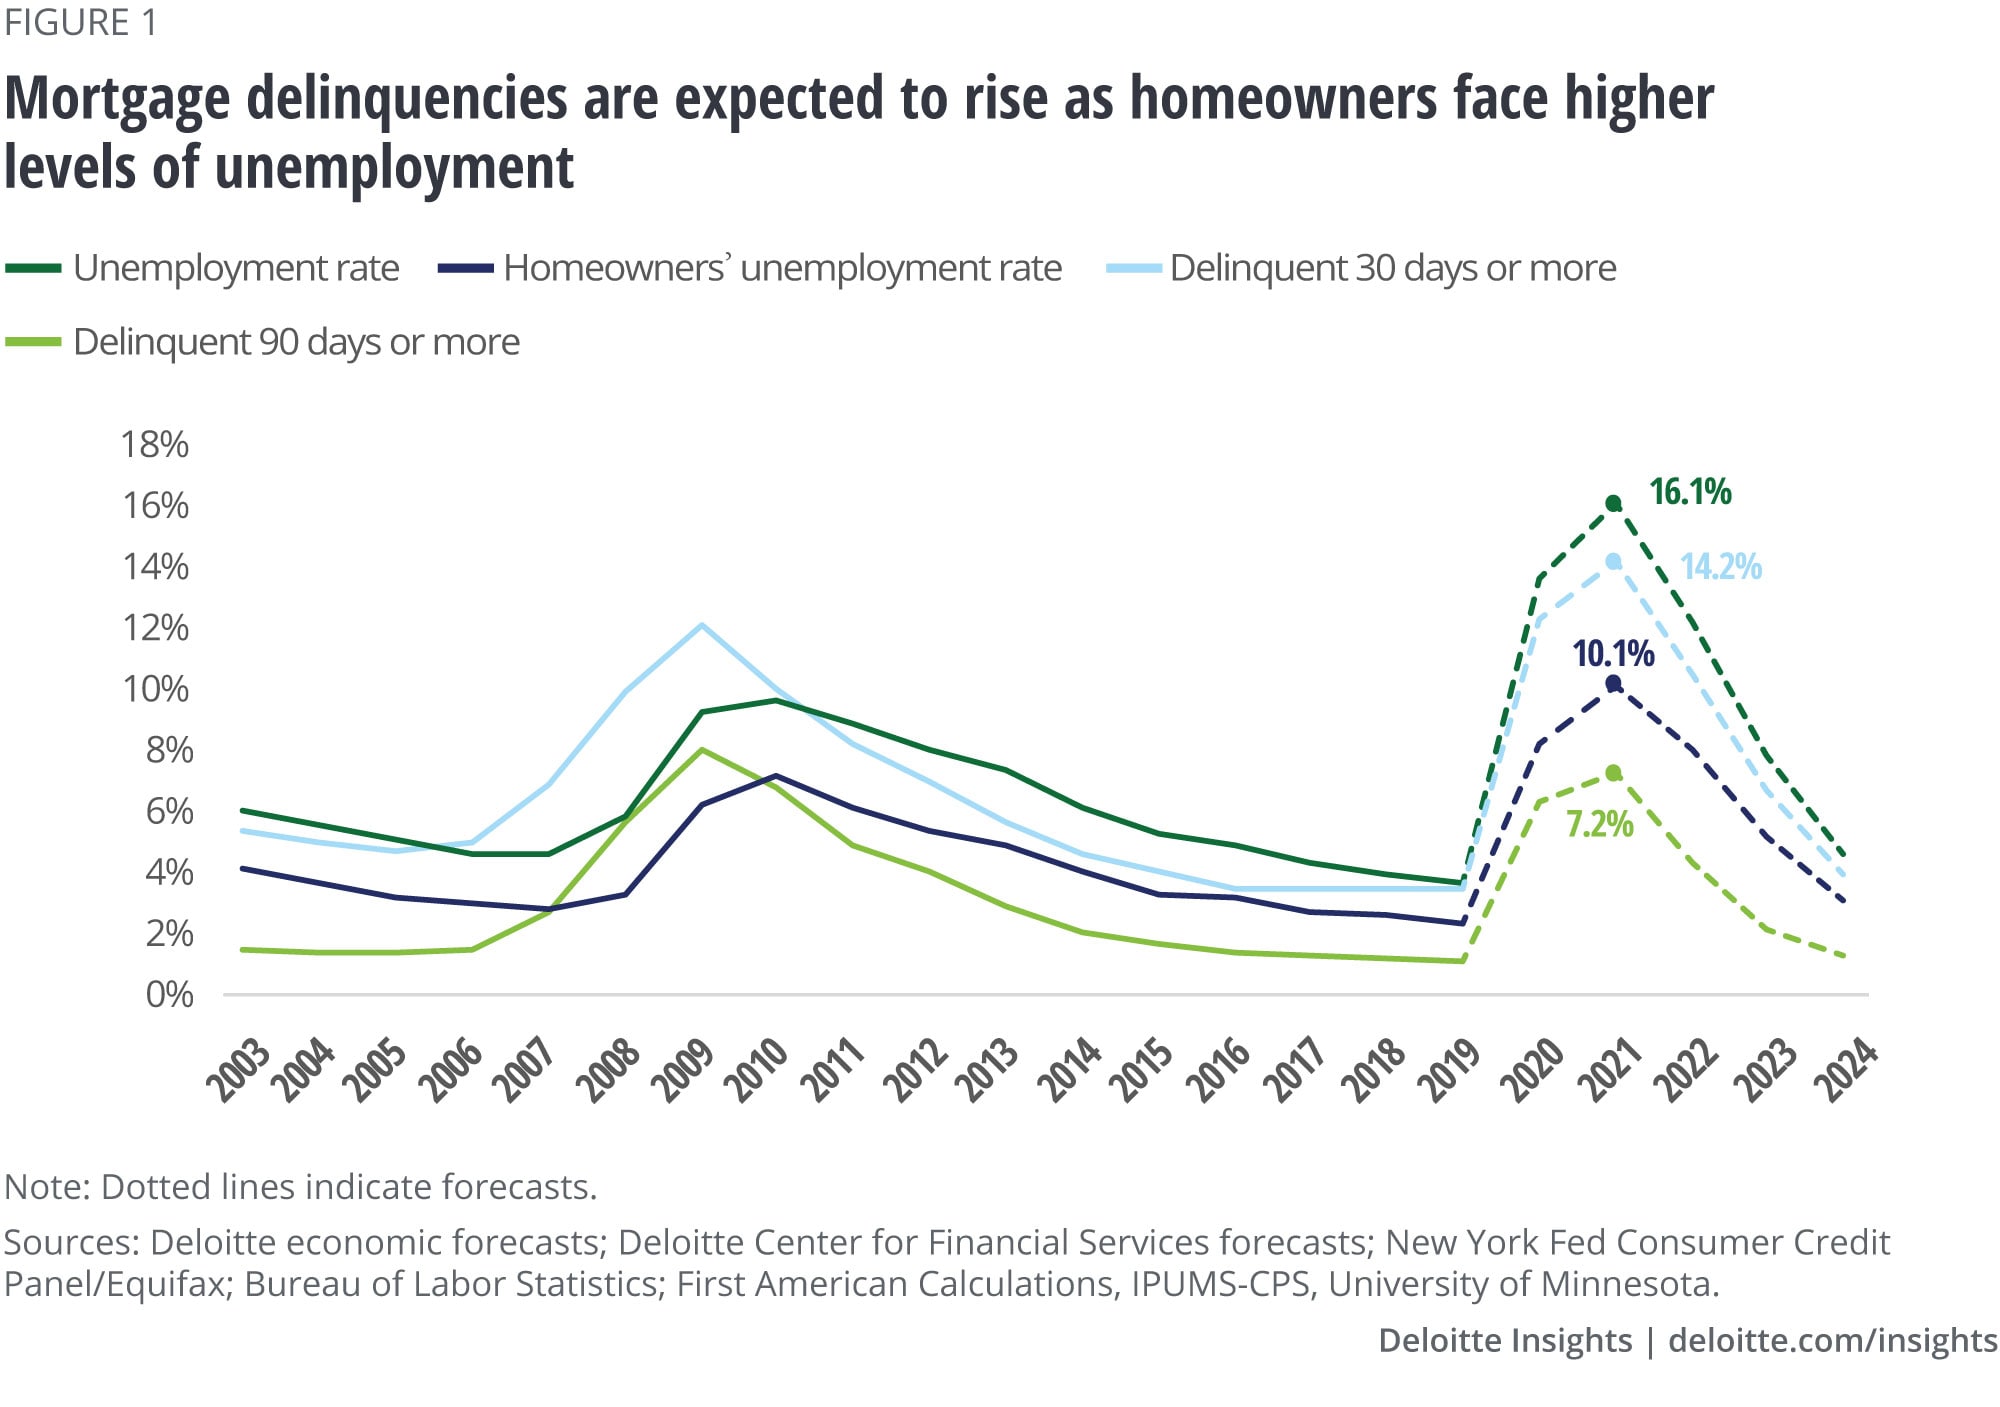 Mortgage delinquencies are expected to rise as homeowners continue to face higher levels of unemployment